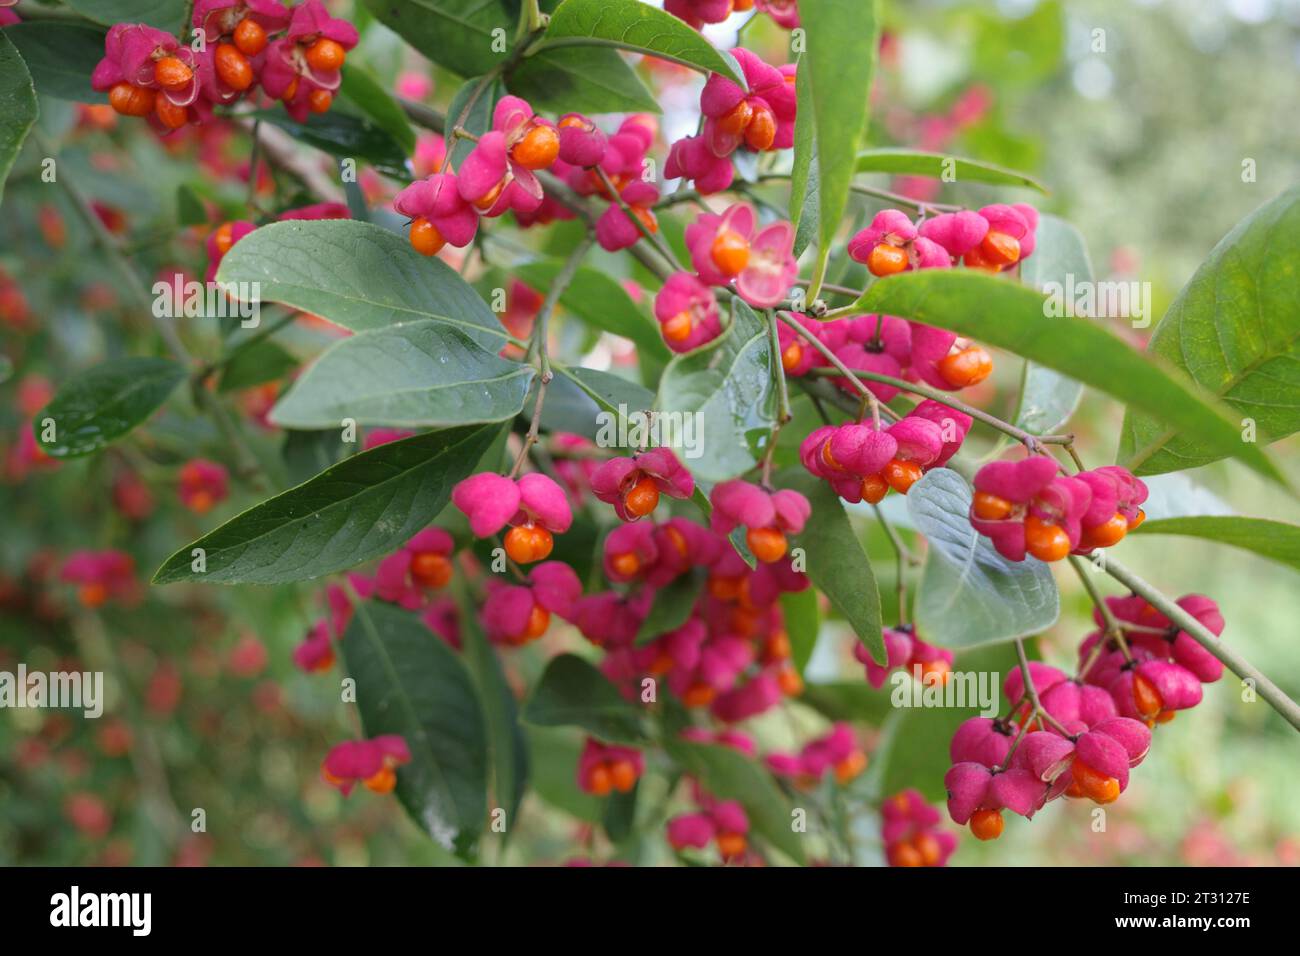 Opened Euonymus europaeus or common spindle flowers with orange poisonous fruits Stock Photo